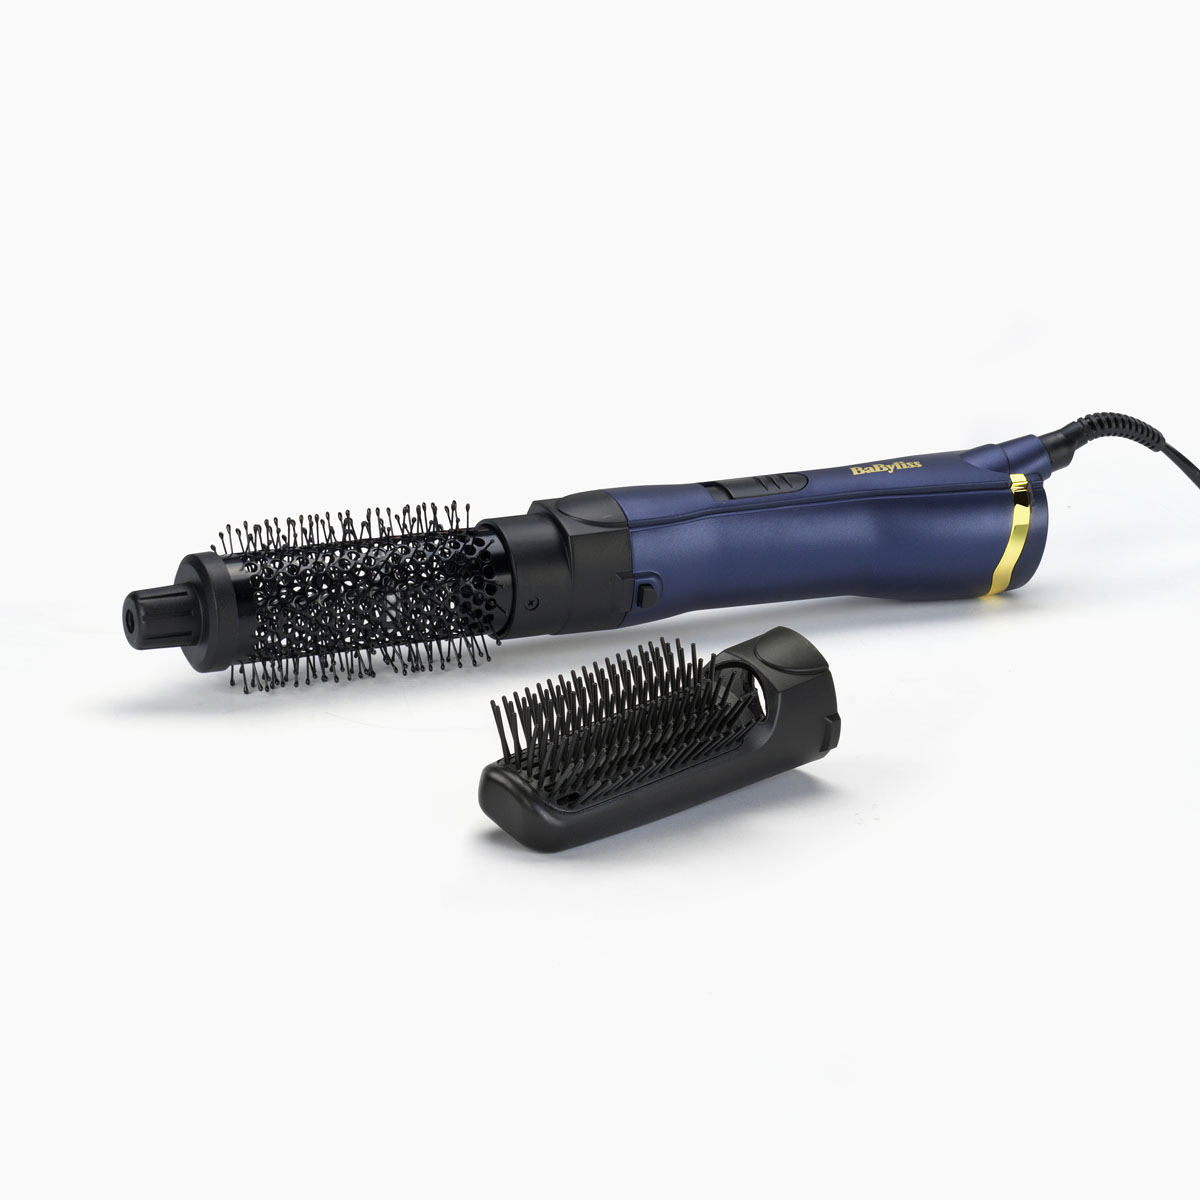 Brosse soufflante Midnight Luxe